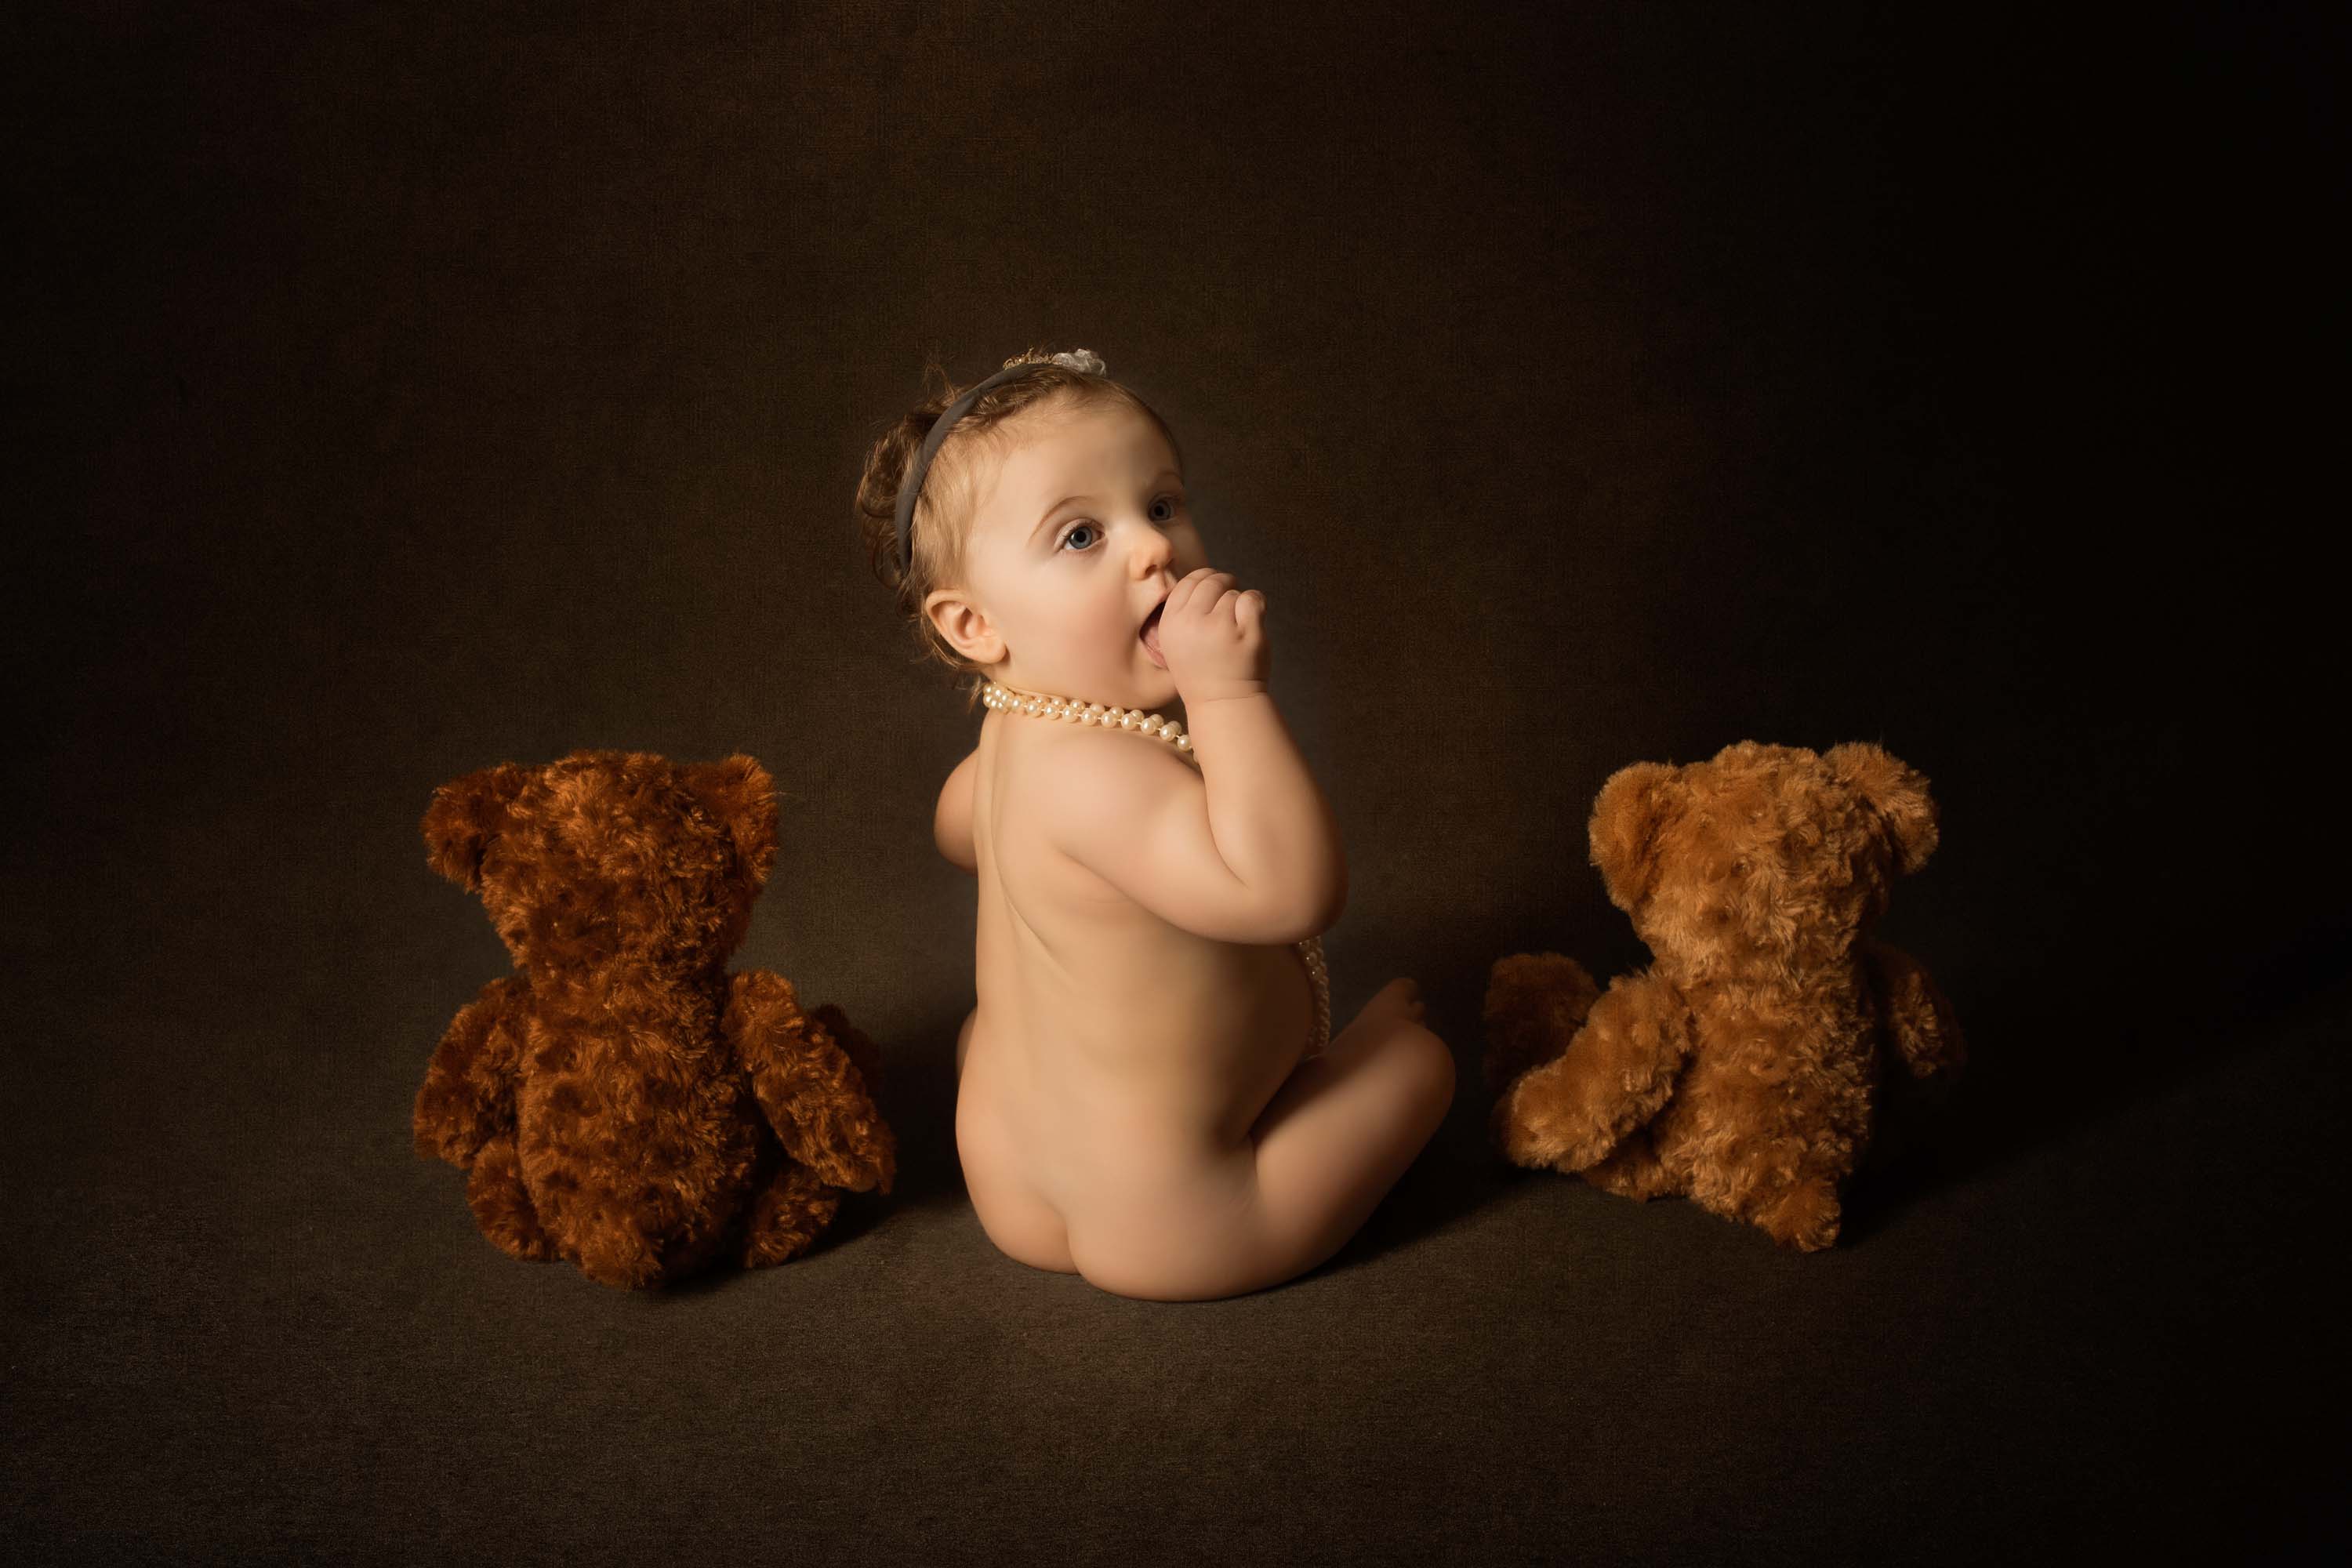 One year old sitting facing away from the camera with thumb in her mouth and a teddy bear on either side